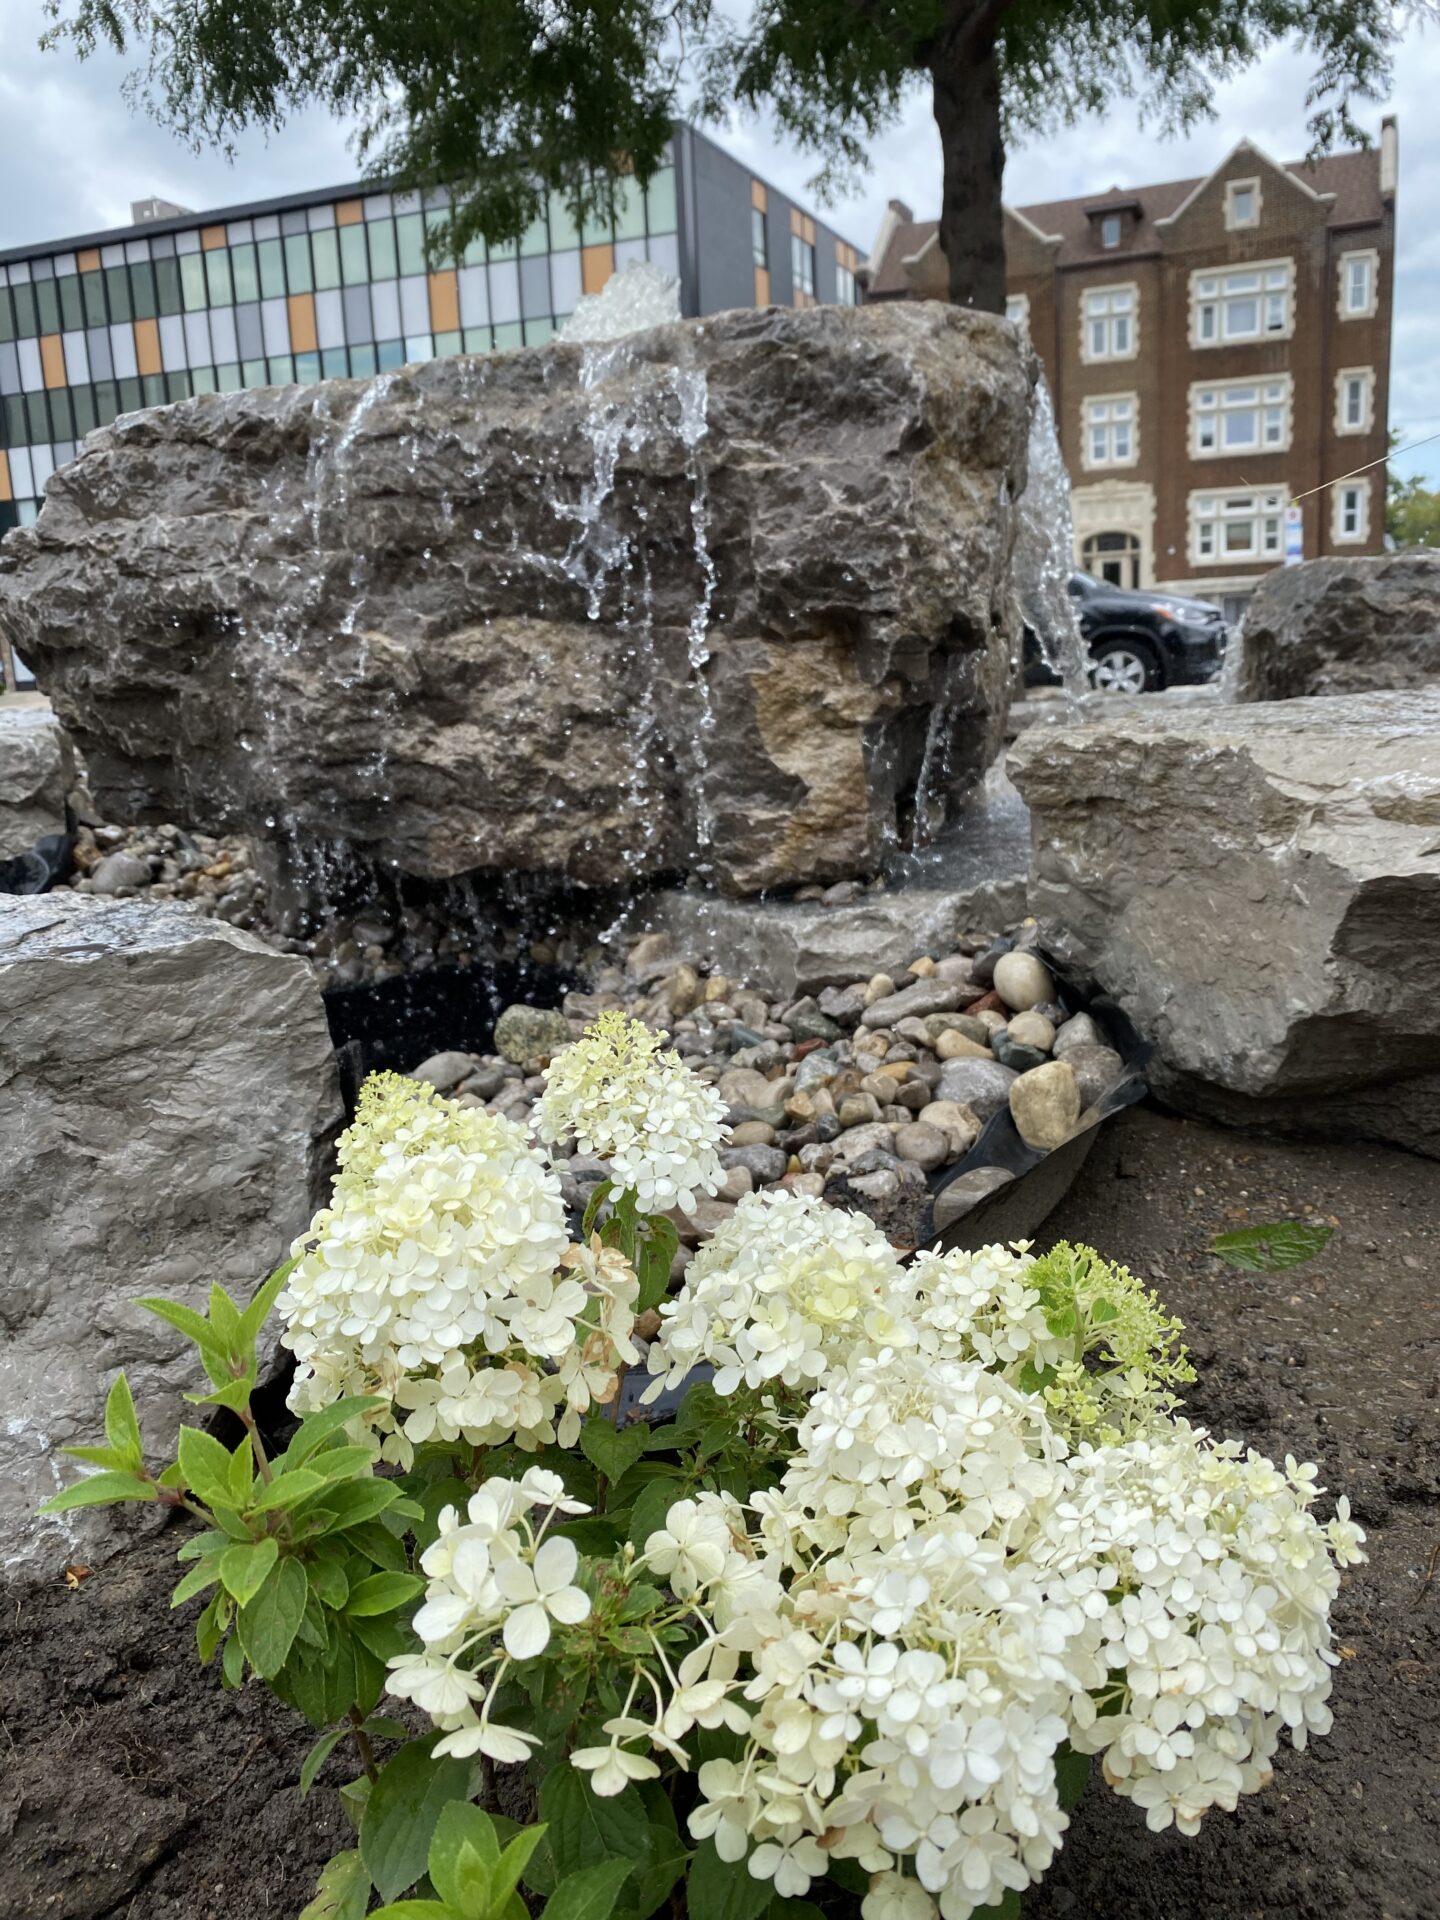 A man-made water feature with water cascading over rocks, surrounded by blooming white hydrangeas, set against an urban backdrop with buildings and a car.